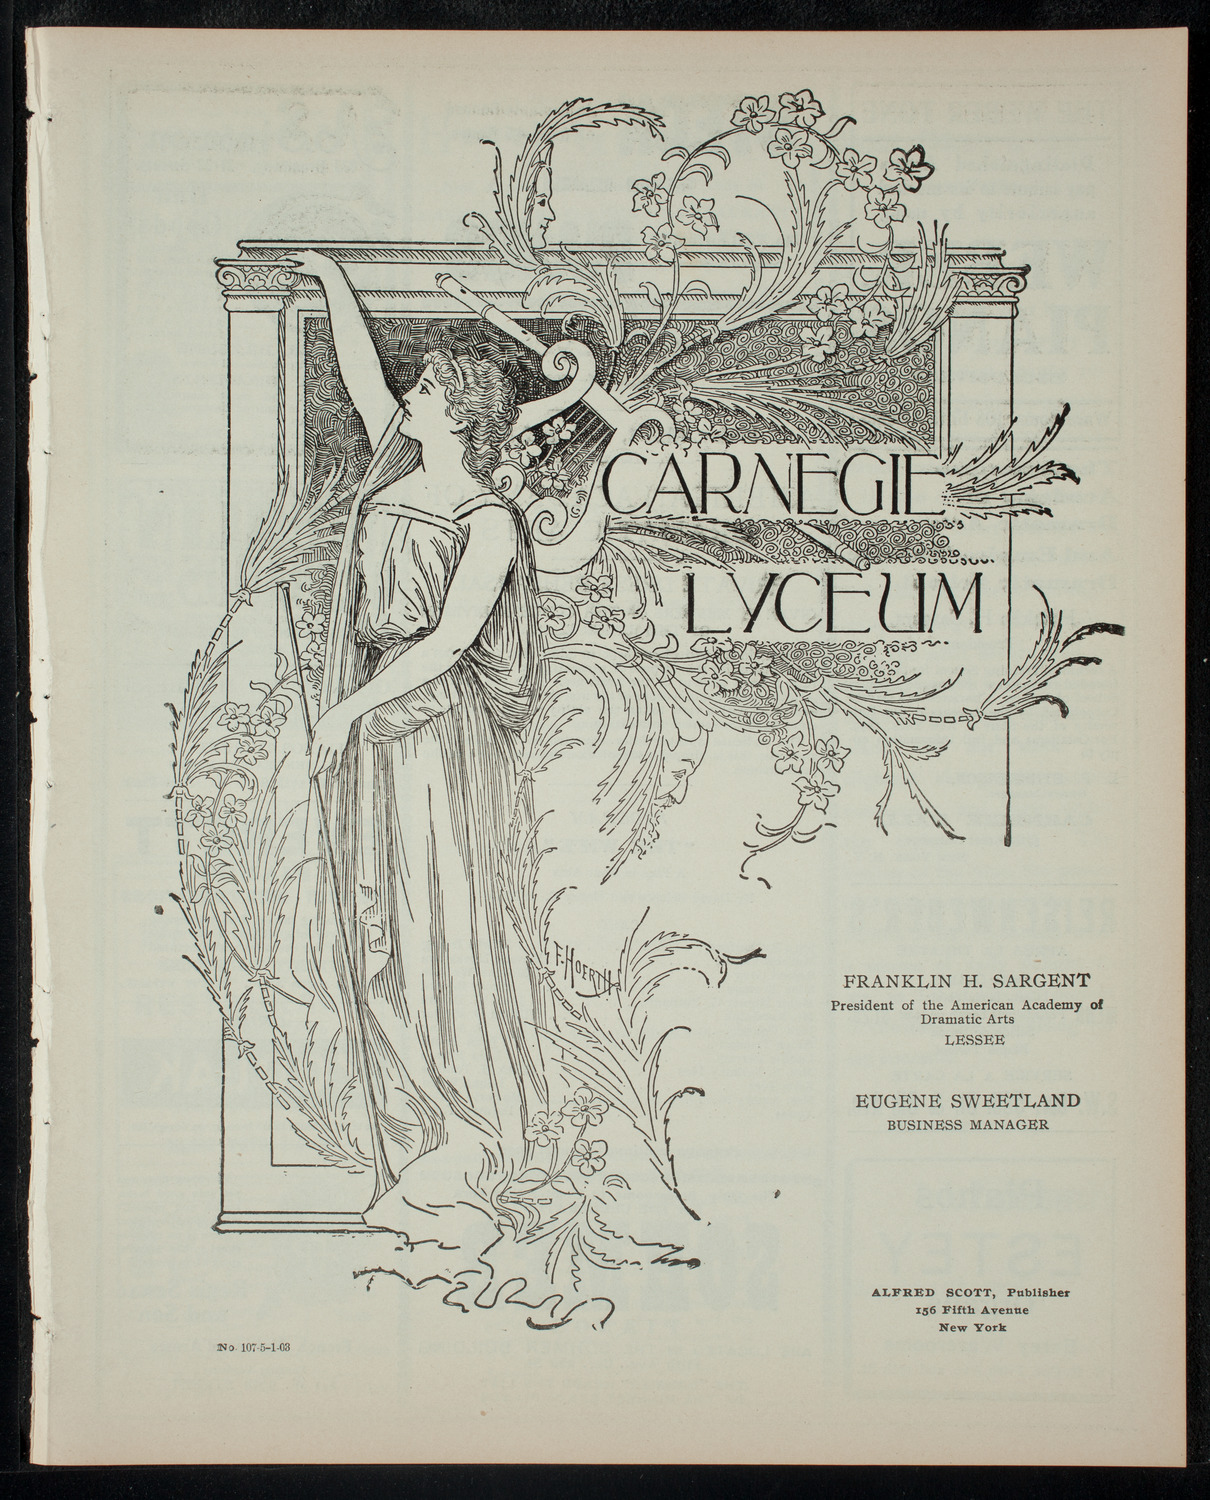 American Academy of Dramatic Arts, May 1, 1903, program page 1